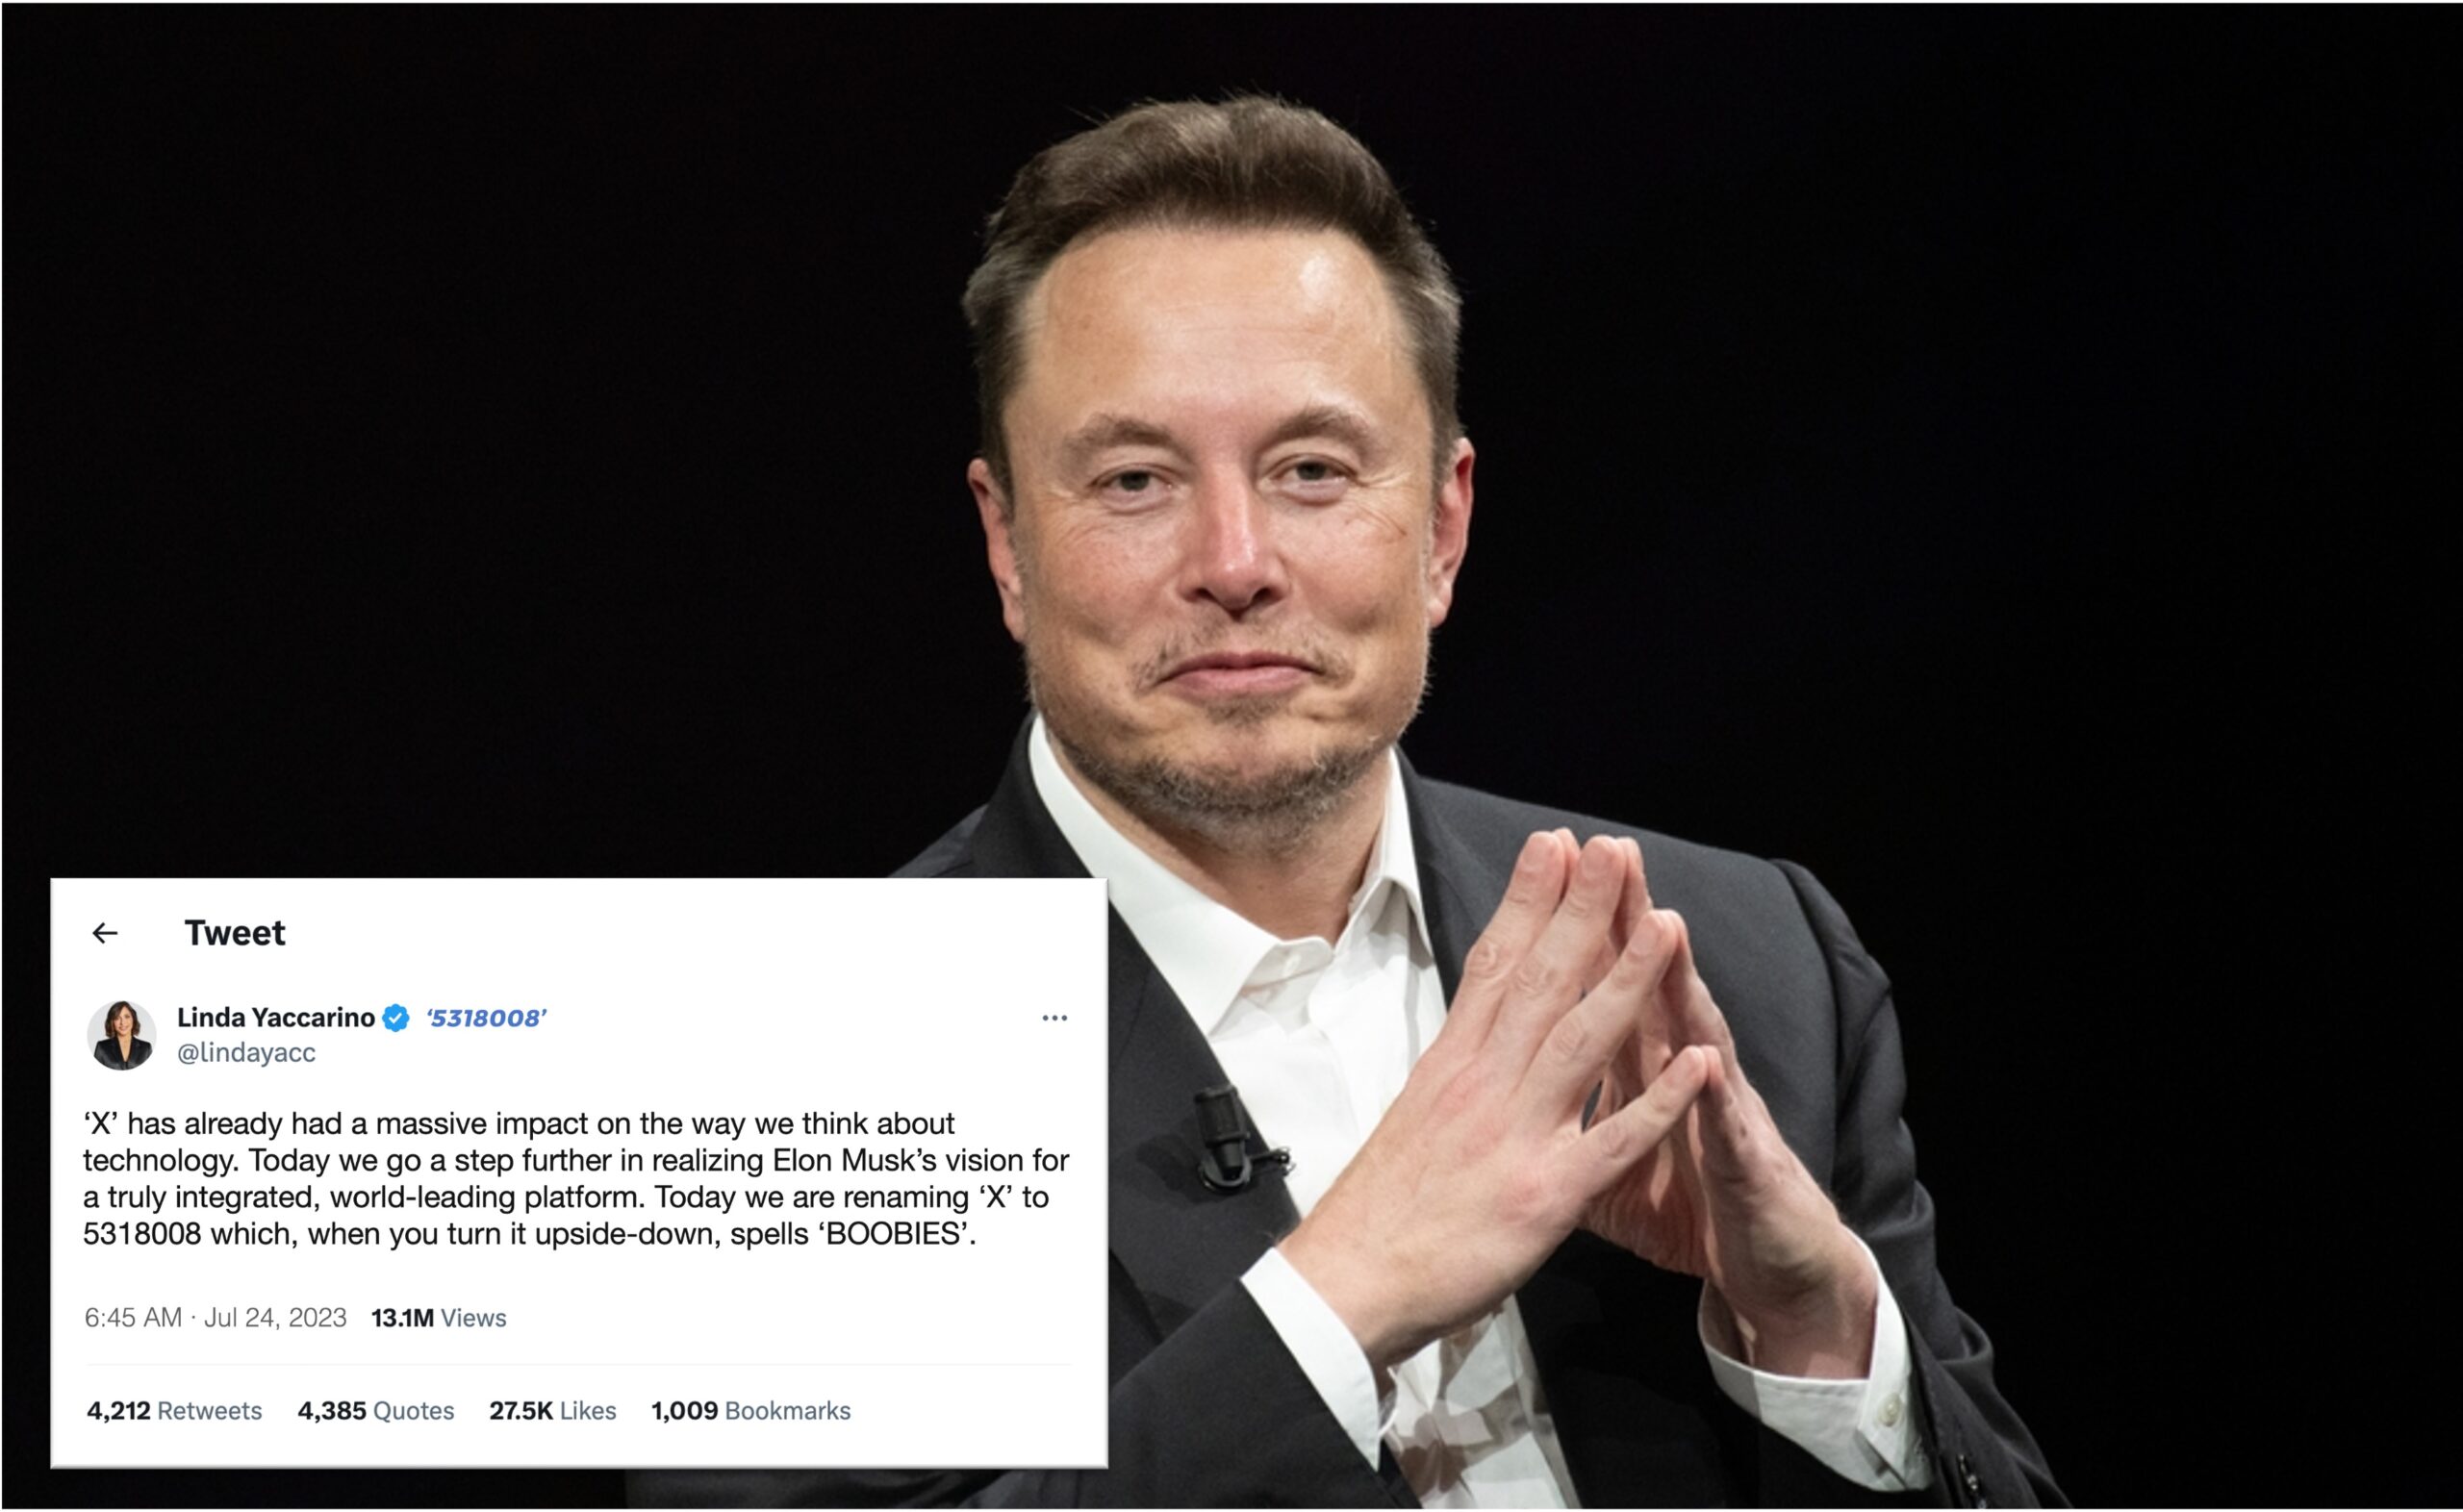 Musk Renames Twitter '5318008', Which Spells 'Boobies' When You